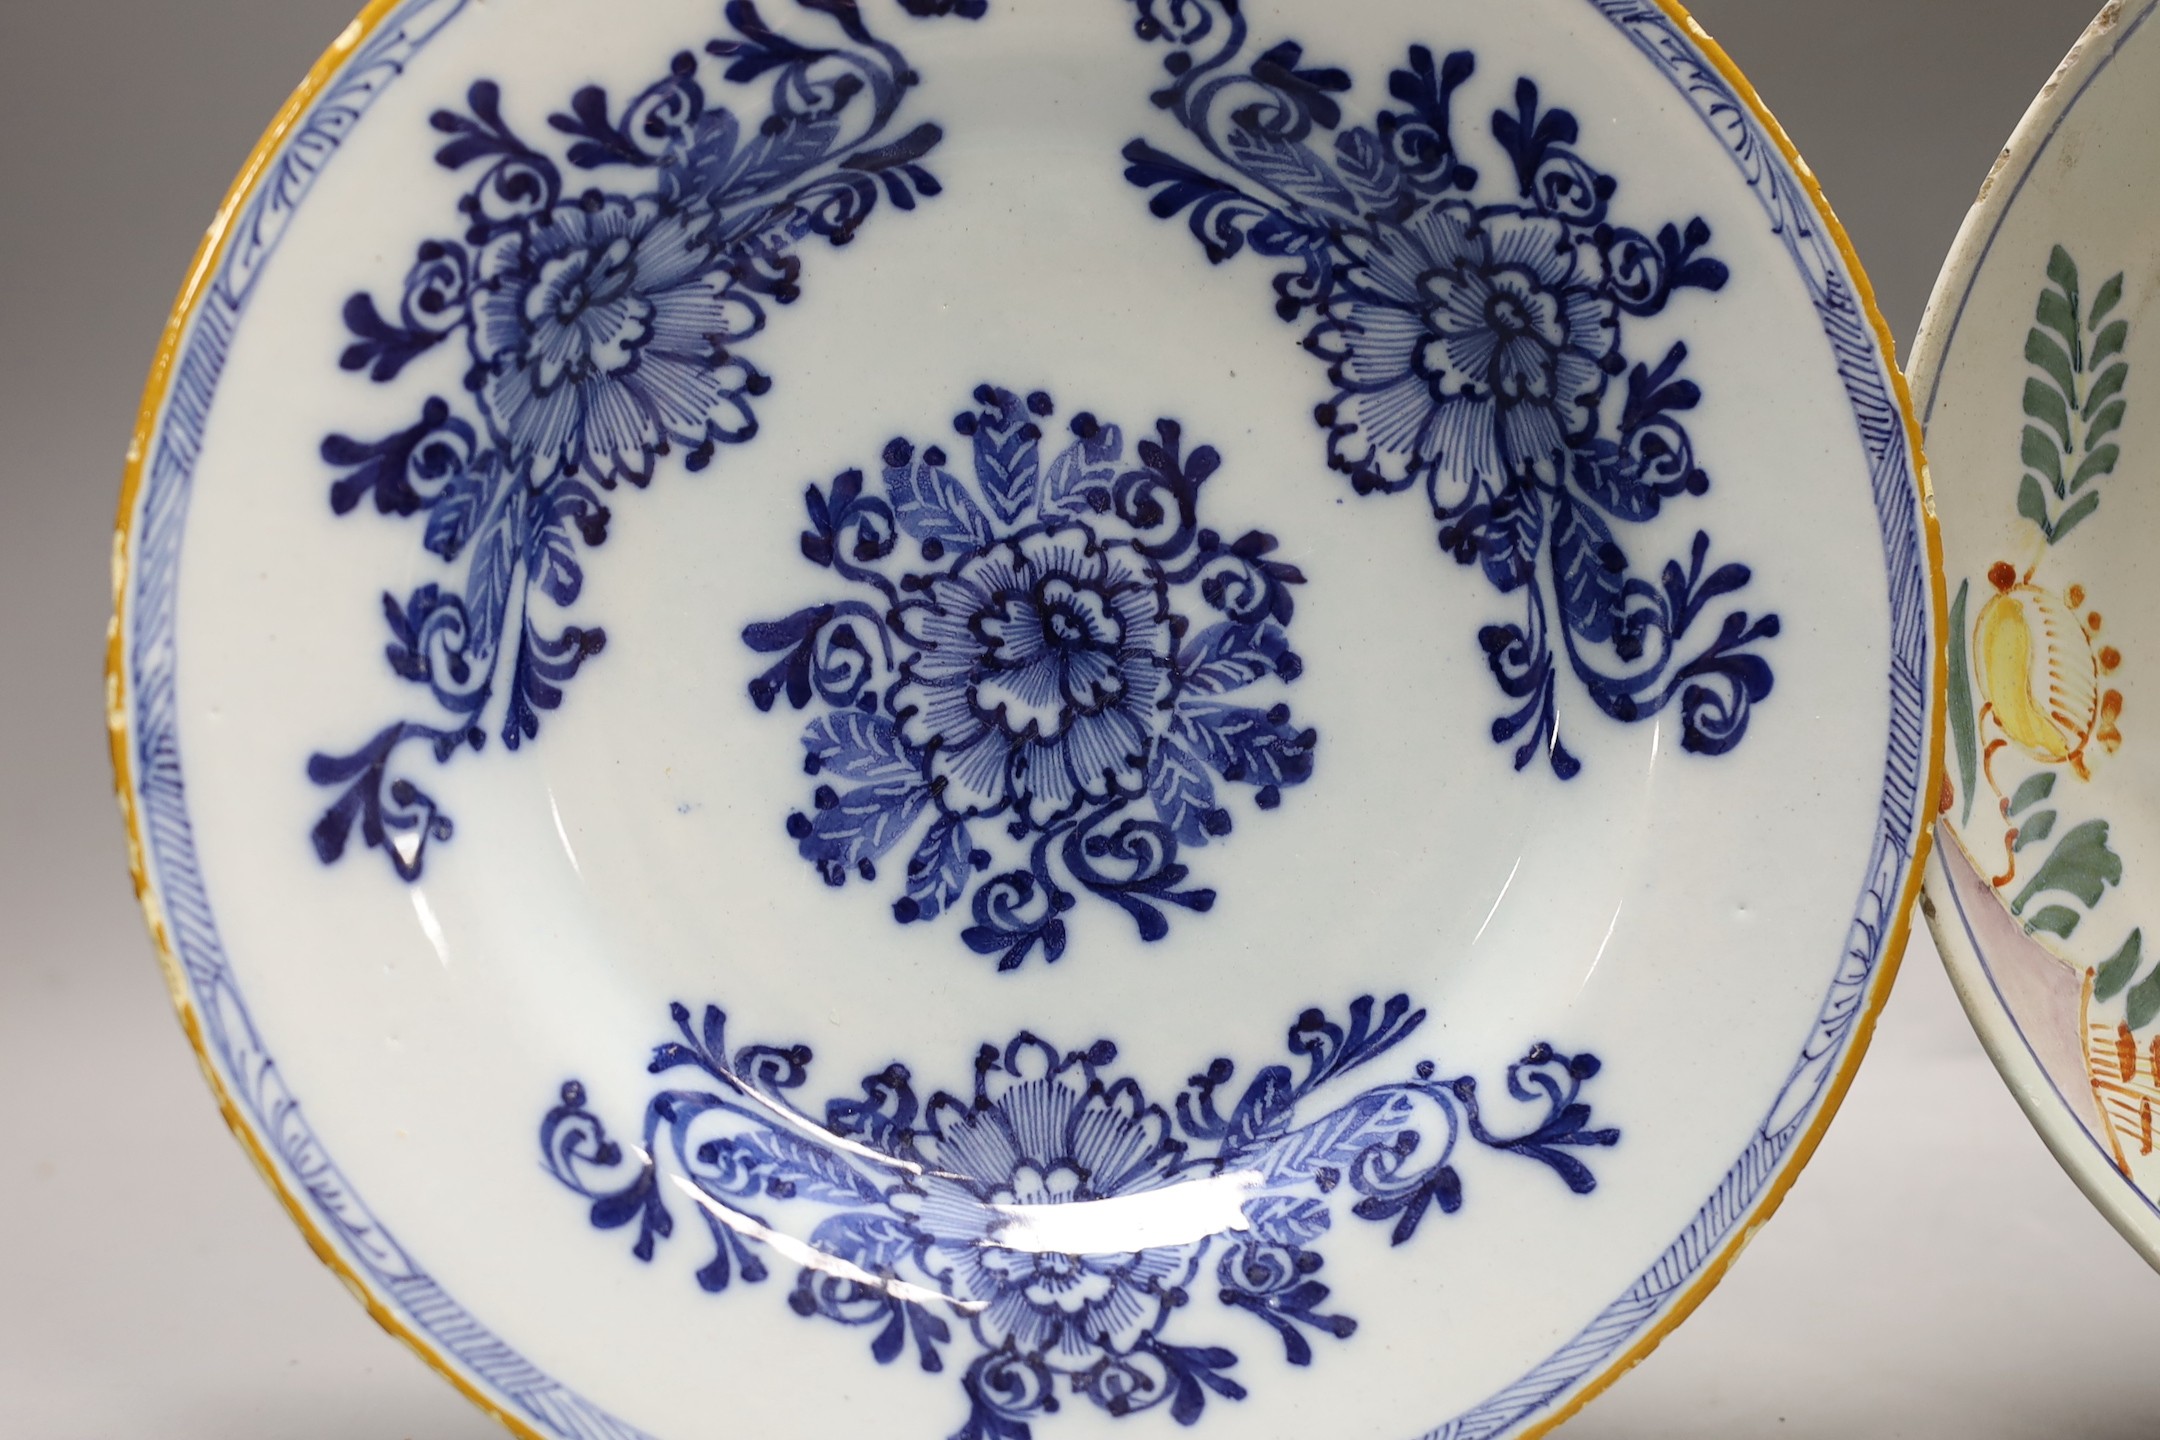 An early 18th century Delft polychrome dish and a mid 18th century Delft blue and white plate, largest 23.5cm diameter